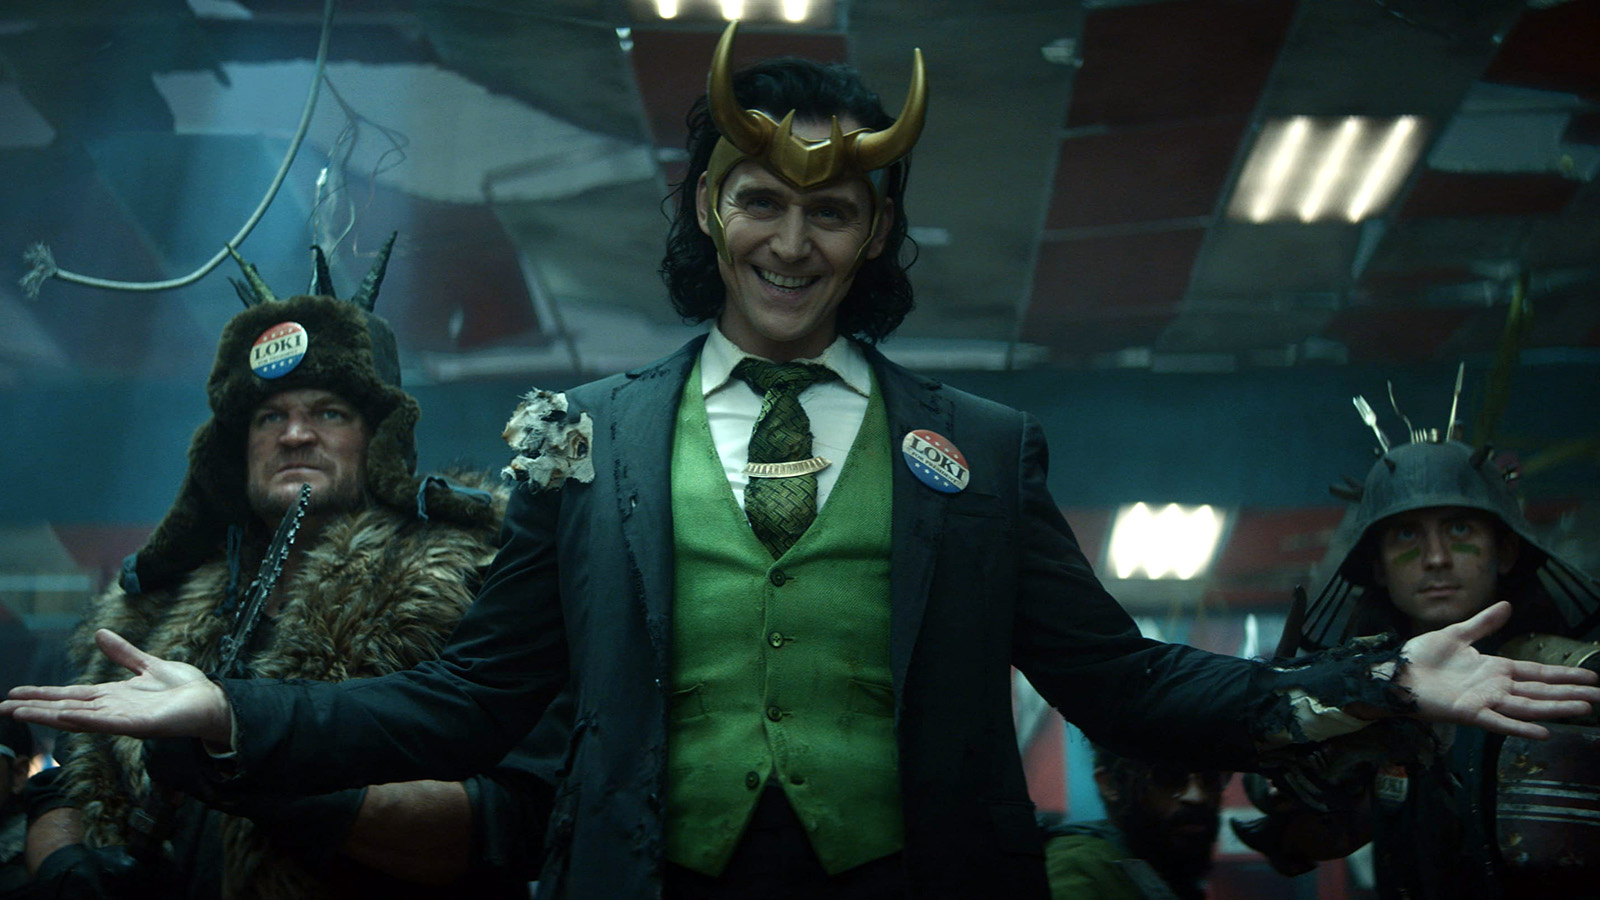 Actor Tom Hiddleston, center, stars in the title role of the new Disney+ series, “Loki.” Photo courtesy of Marvel Studios